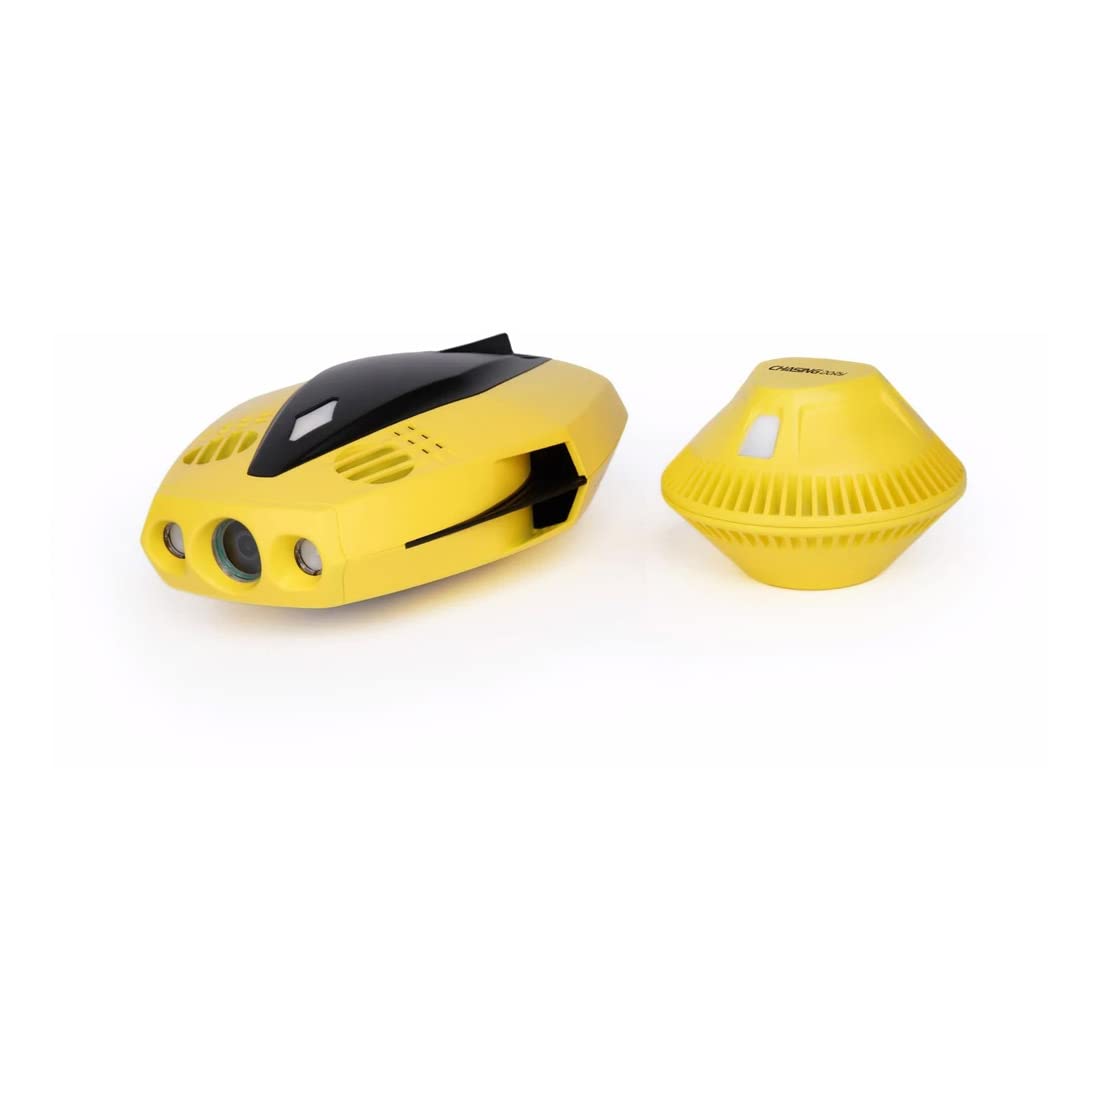 Chasing Dory - Underwater Drone - ROV - Portable - Palm Sized - Waterproof 15M - GPS - WiFi - Yellow